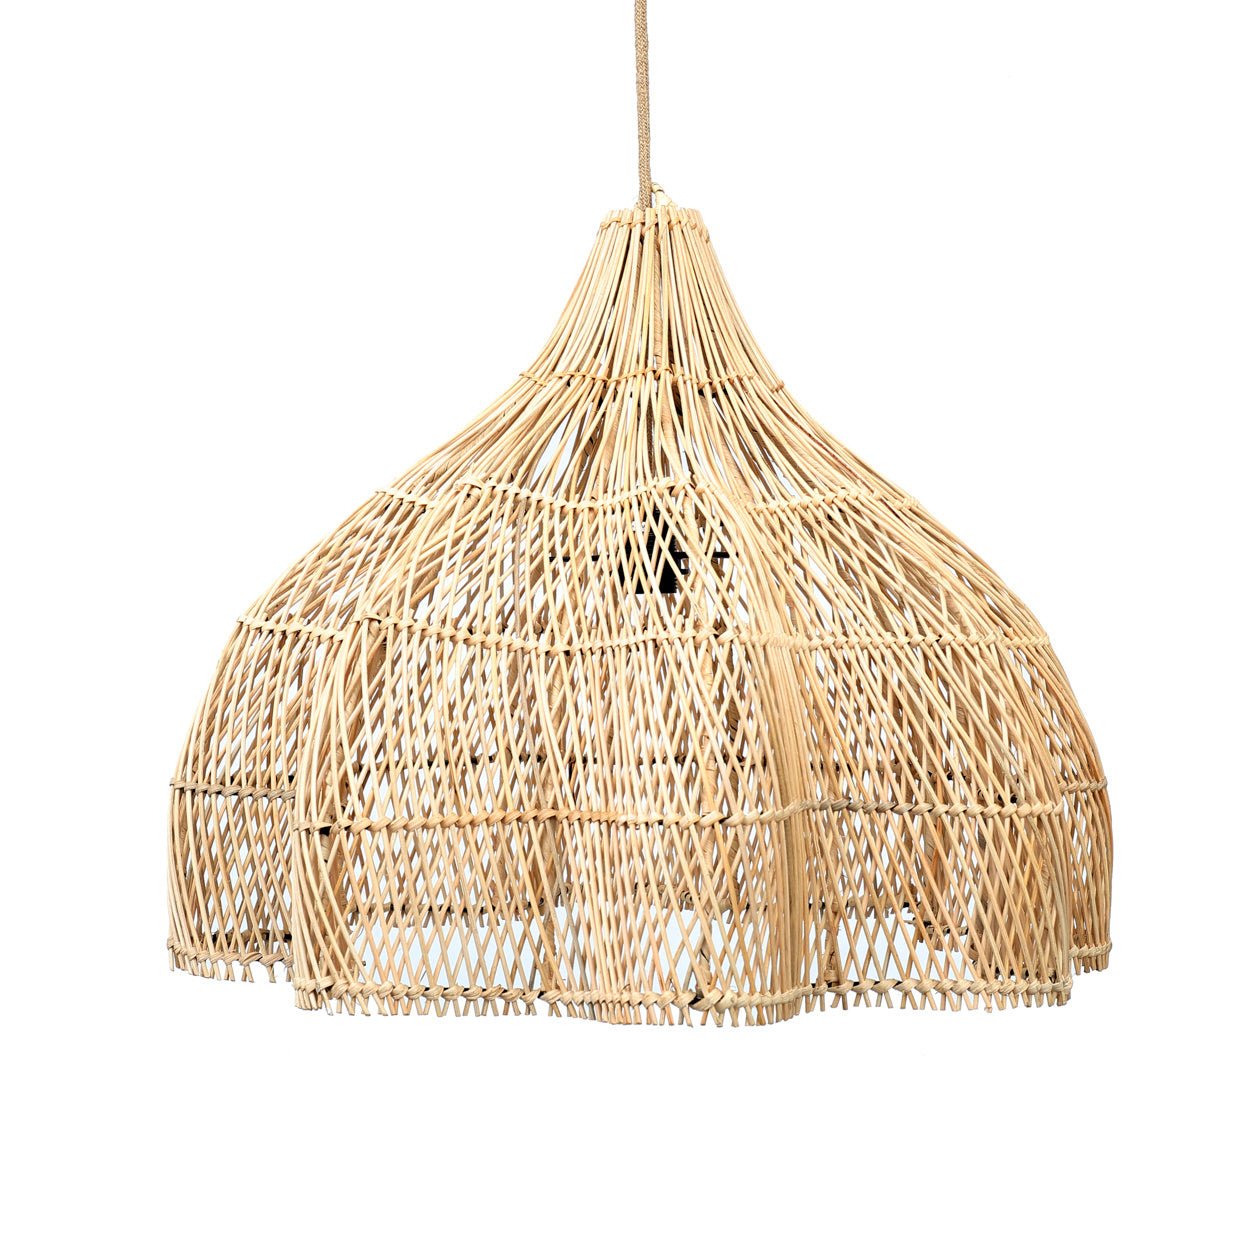 The whipped hanging lamp - Natural - M